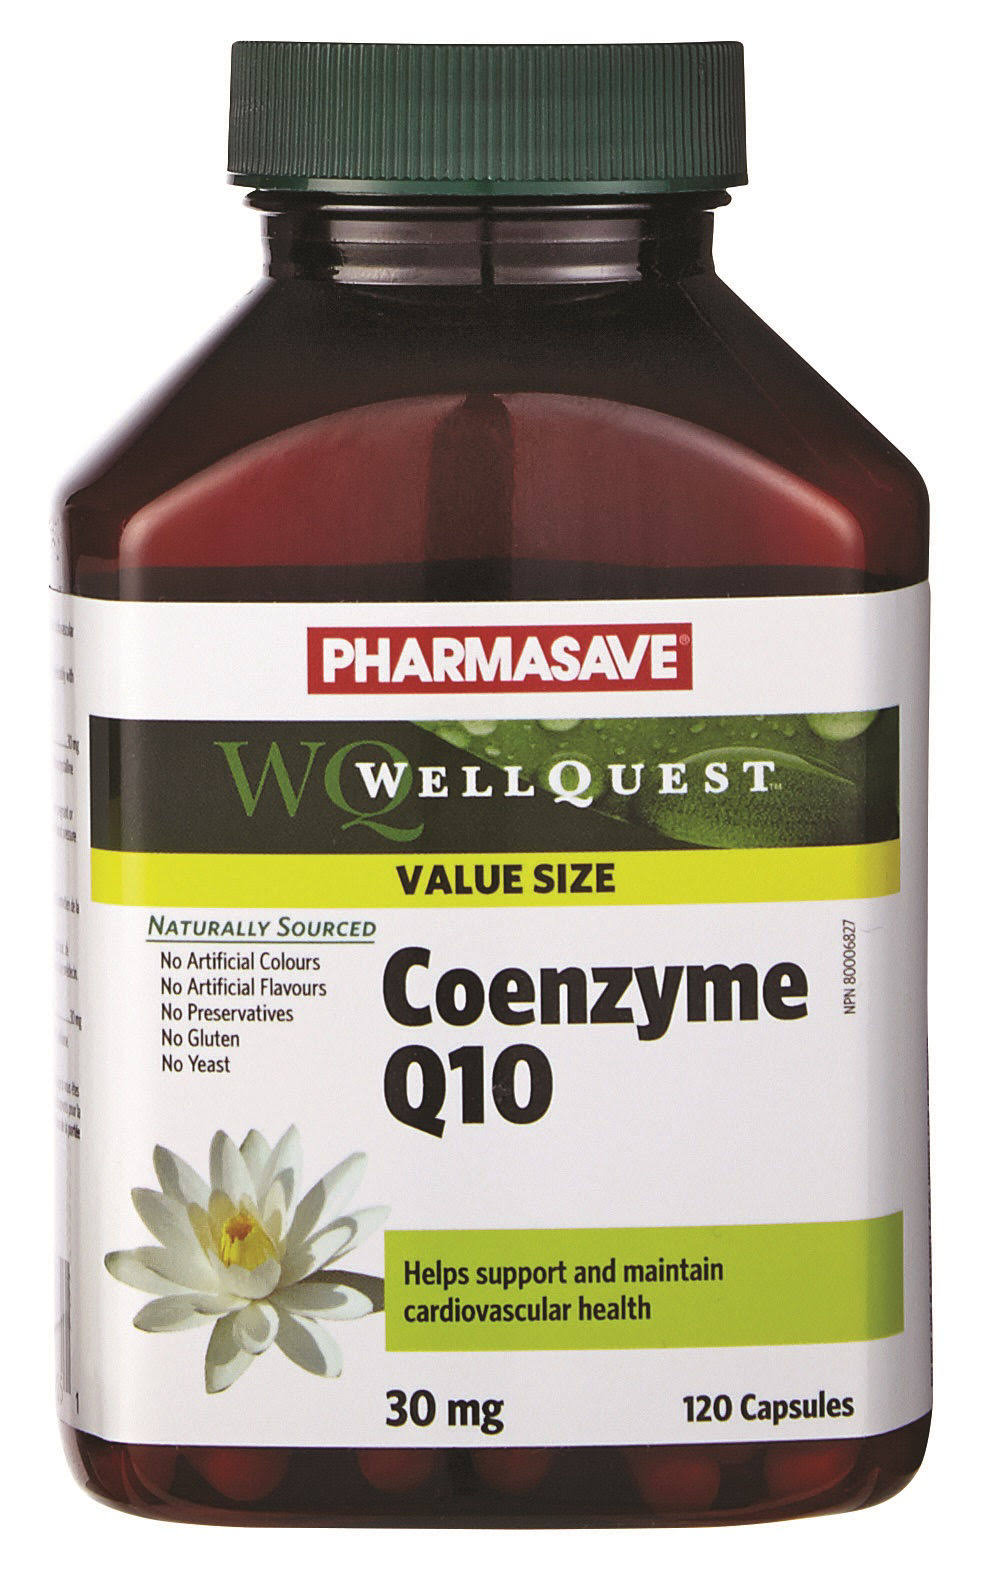 PHARMASAVE WELLQUEST COENZYME Q10 30MG CAPSULE VALUE SIZE 120S